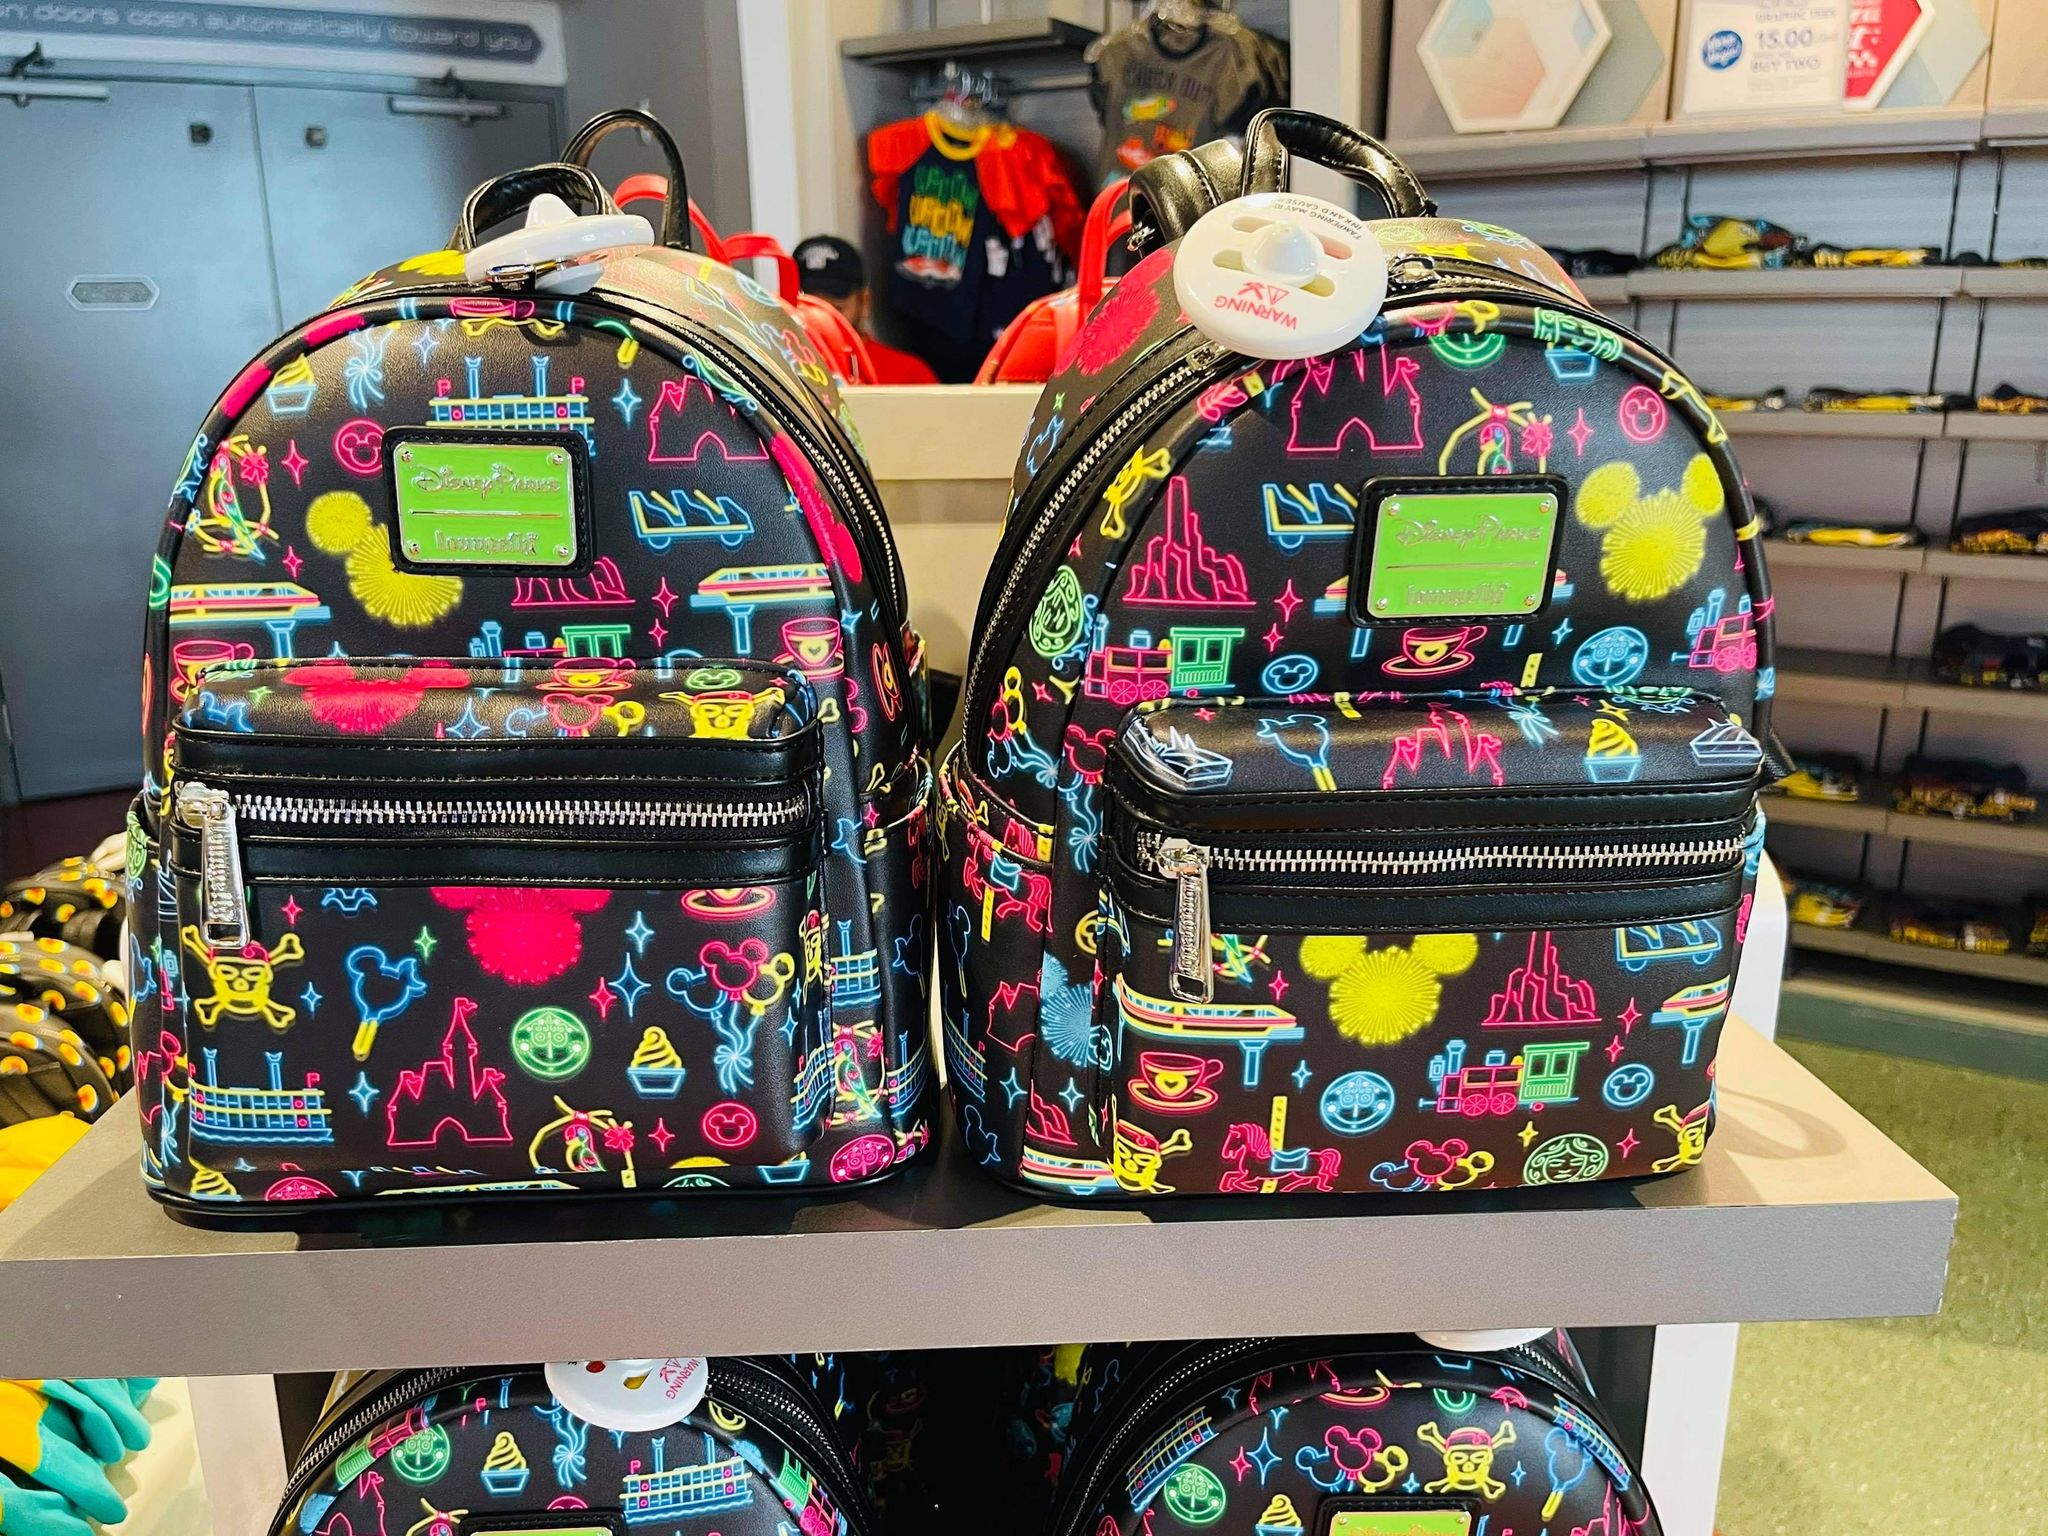 Loungefly Disney Parks Neon Mini Backpack Park Life Attraction Icons